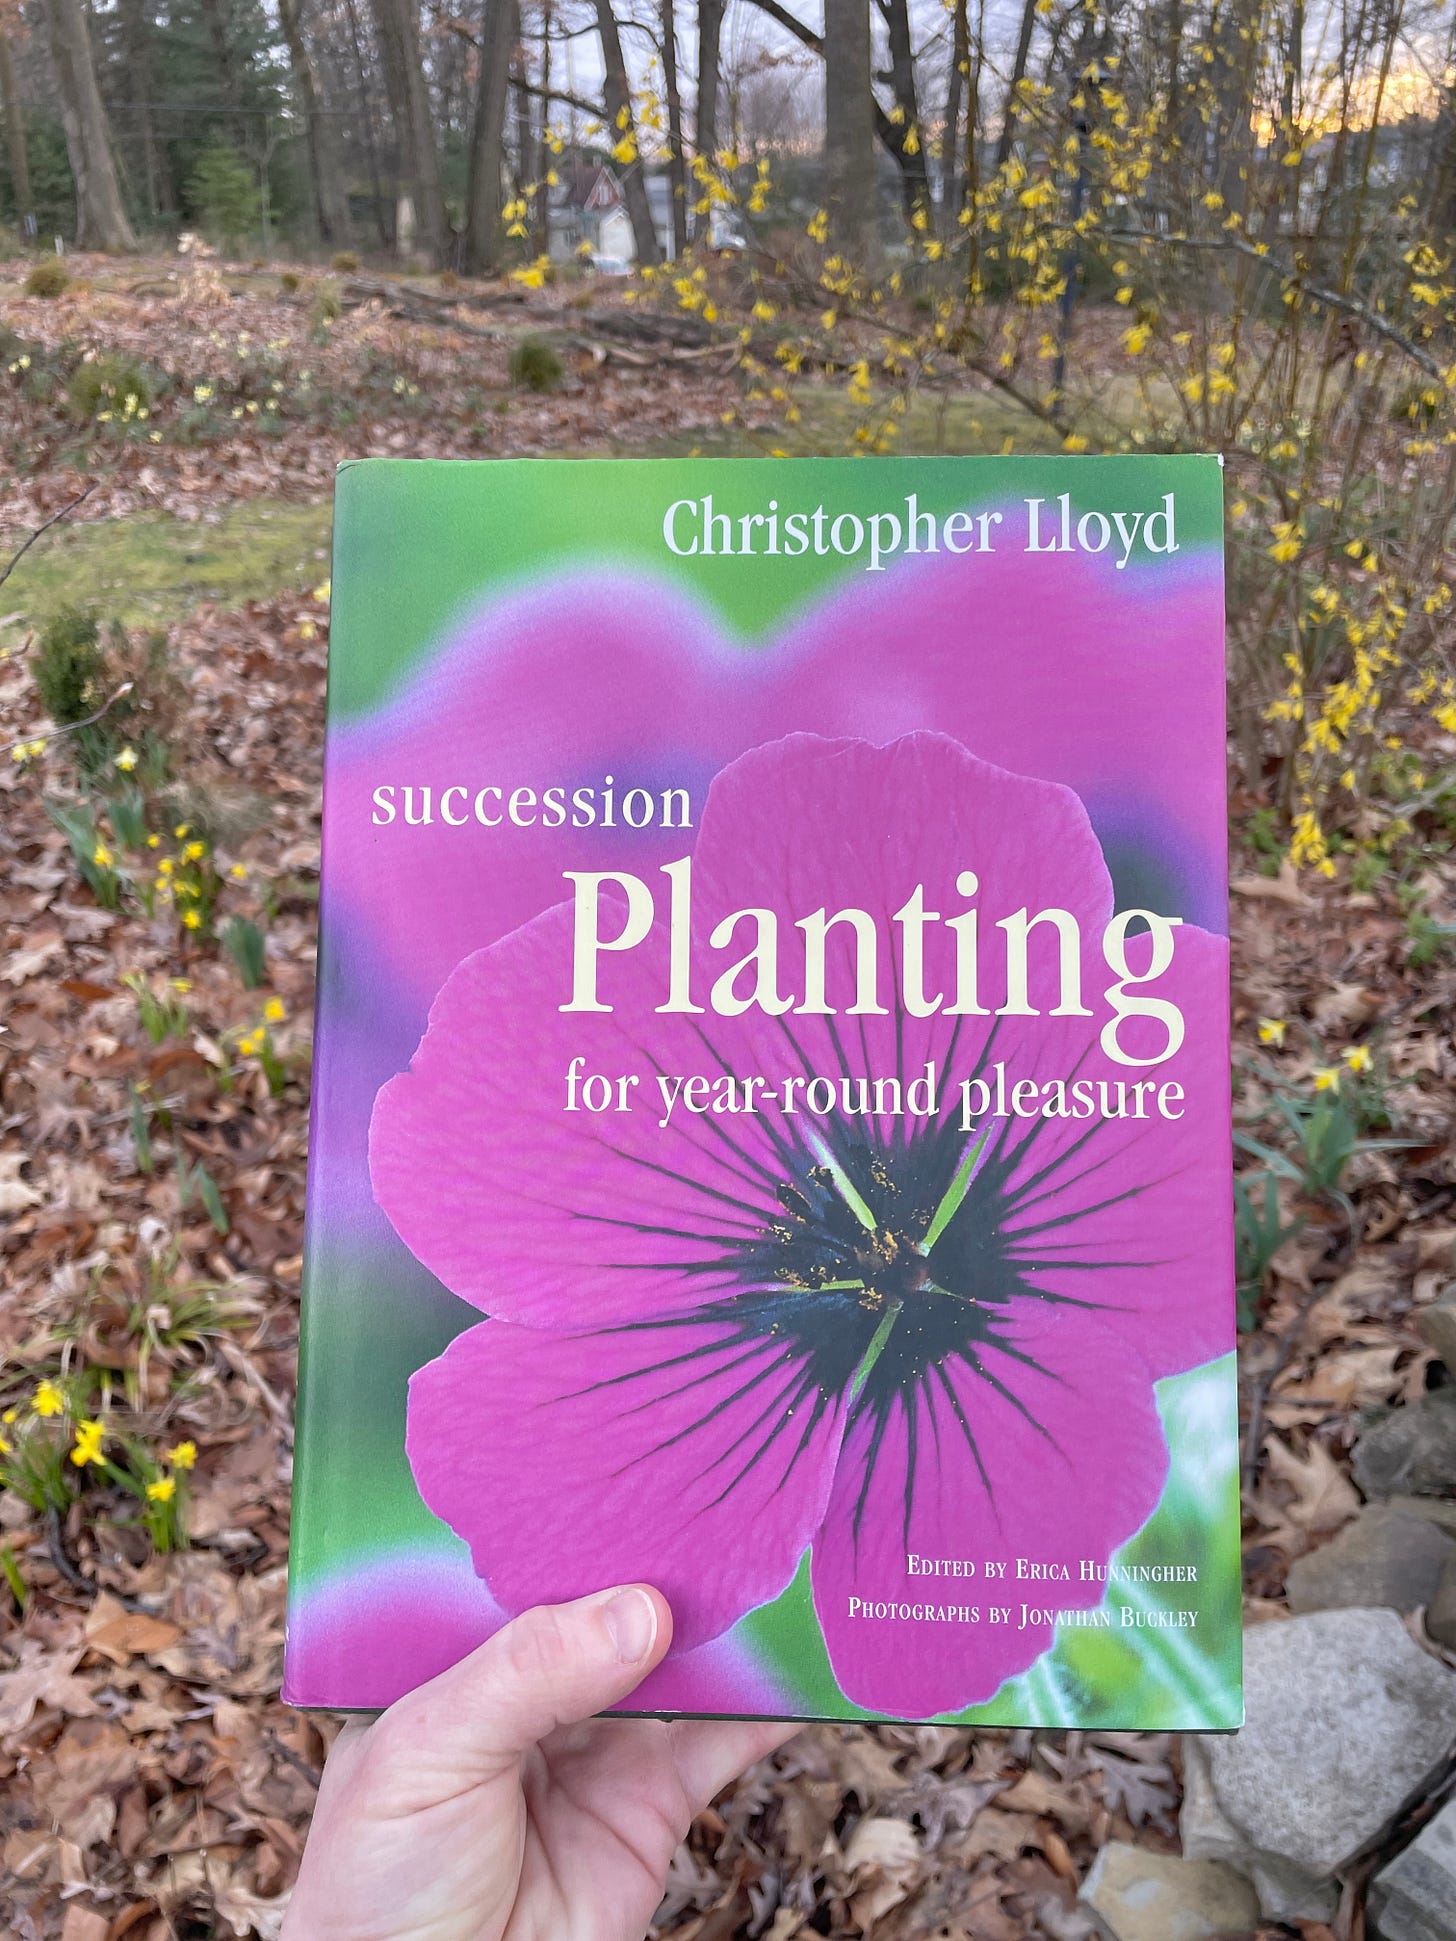 Succession Planting for Year-Round Pleasure in its shocking pink cover with my yellow daffs and Forsythia this week - a combination of which Christo might have approved. 